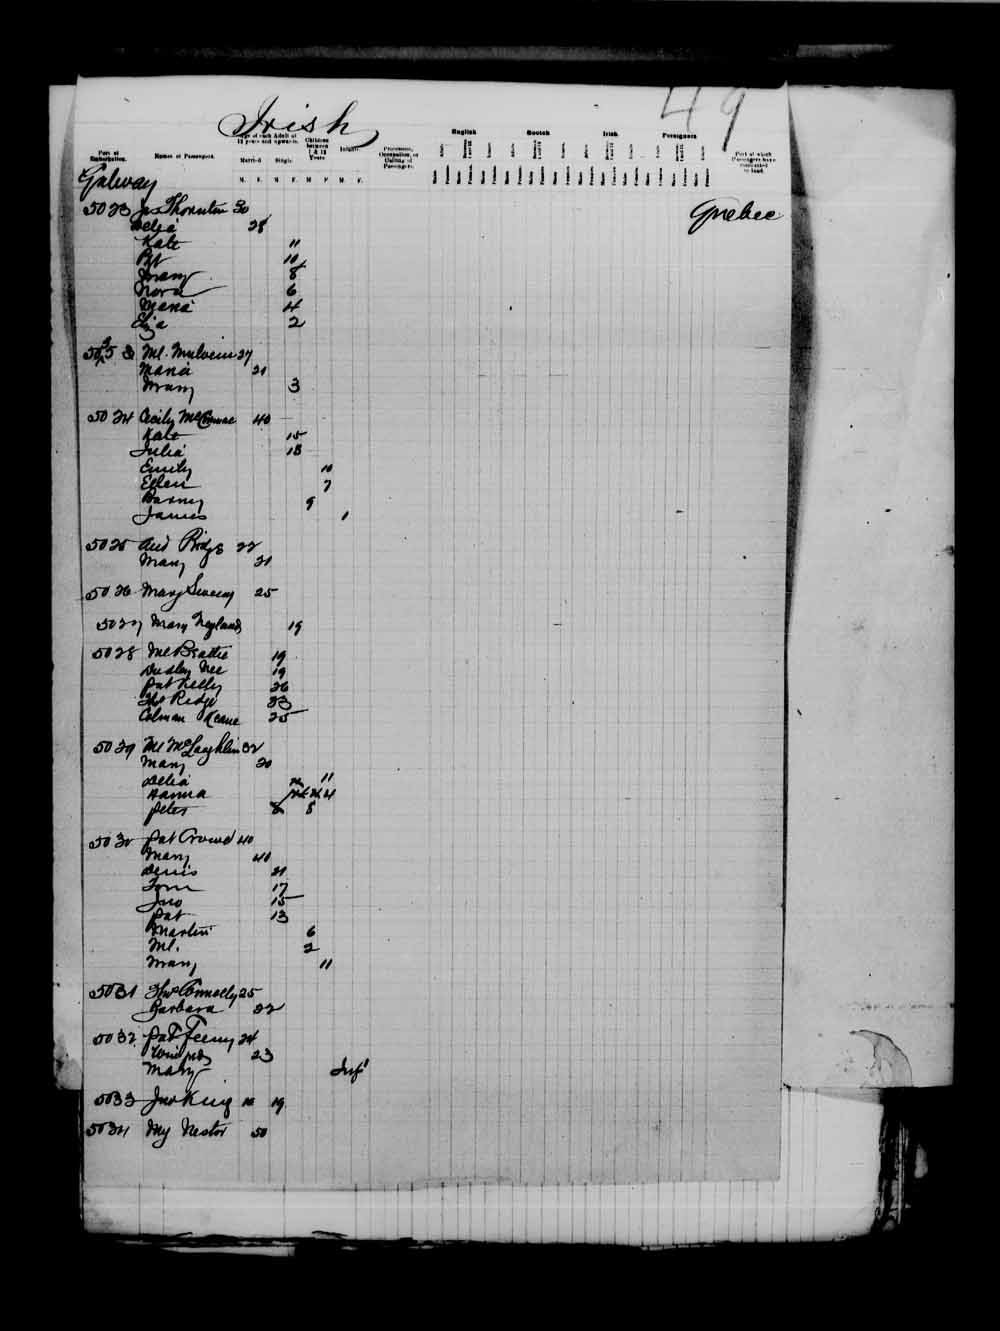 Digitized page of Passenger Lists for Image No.: e003543411